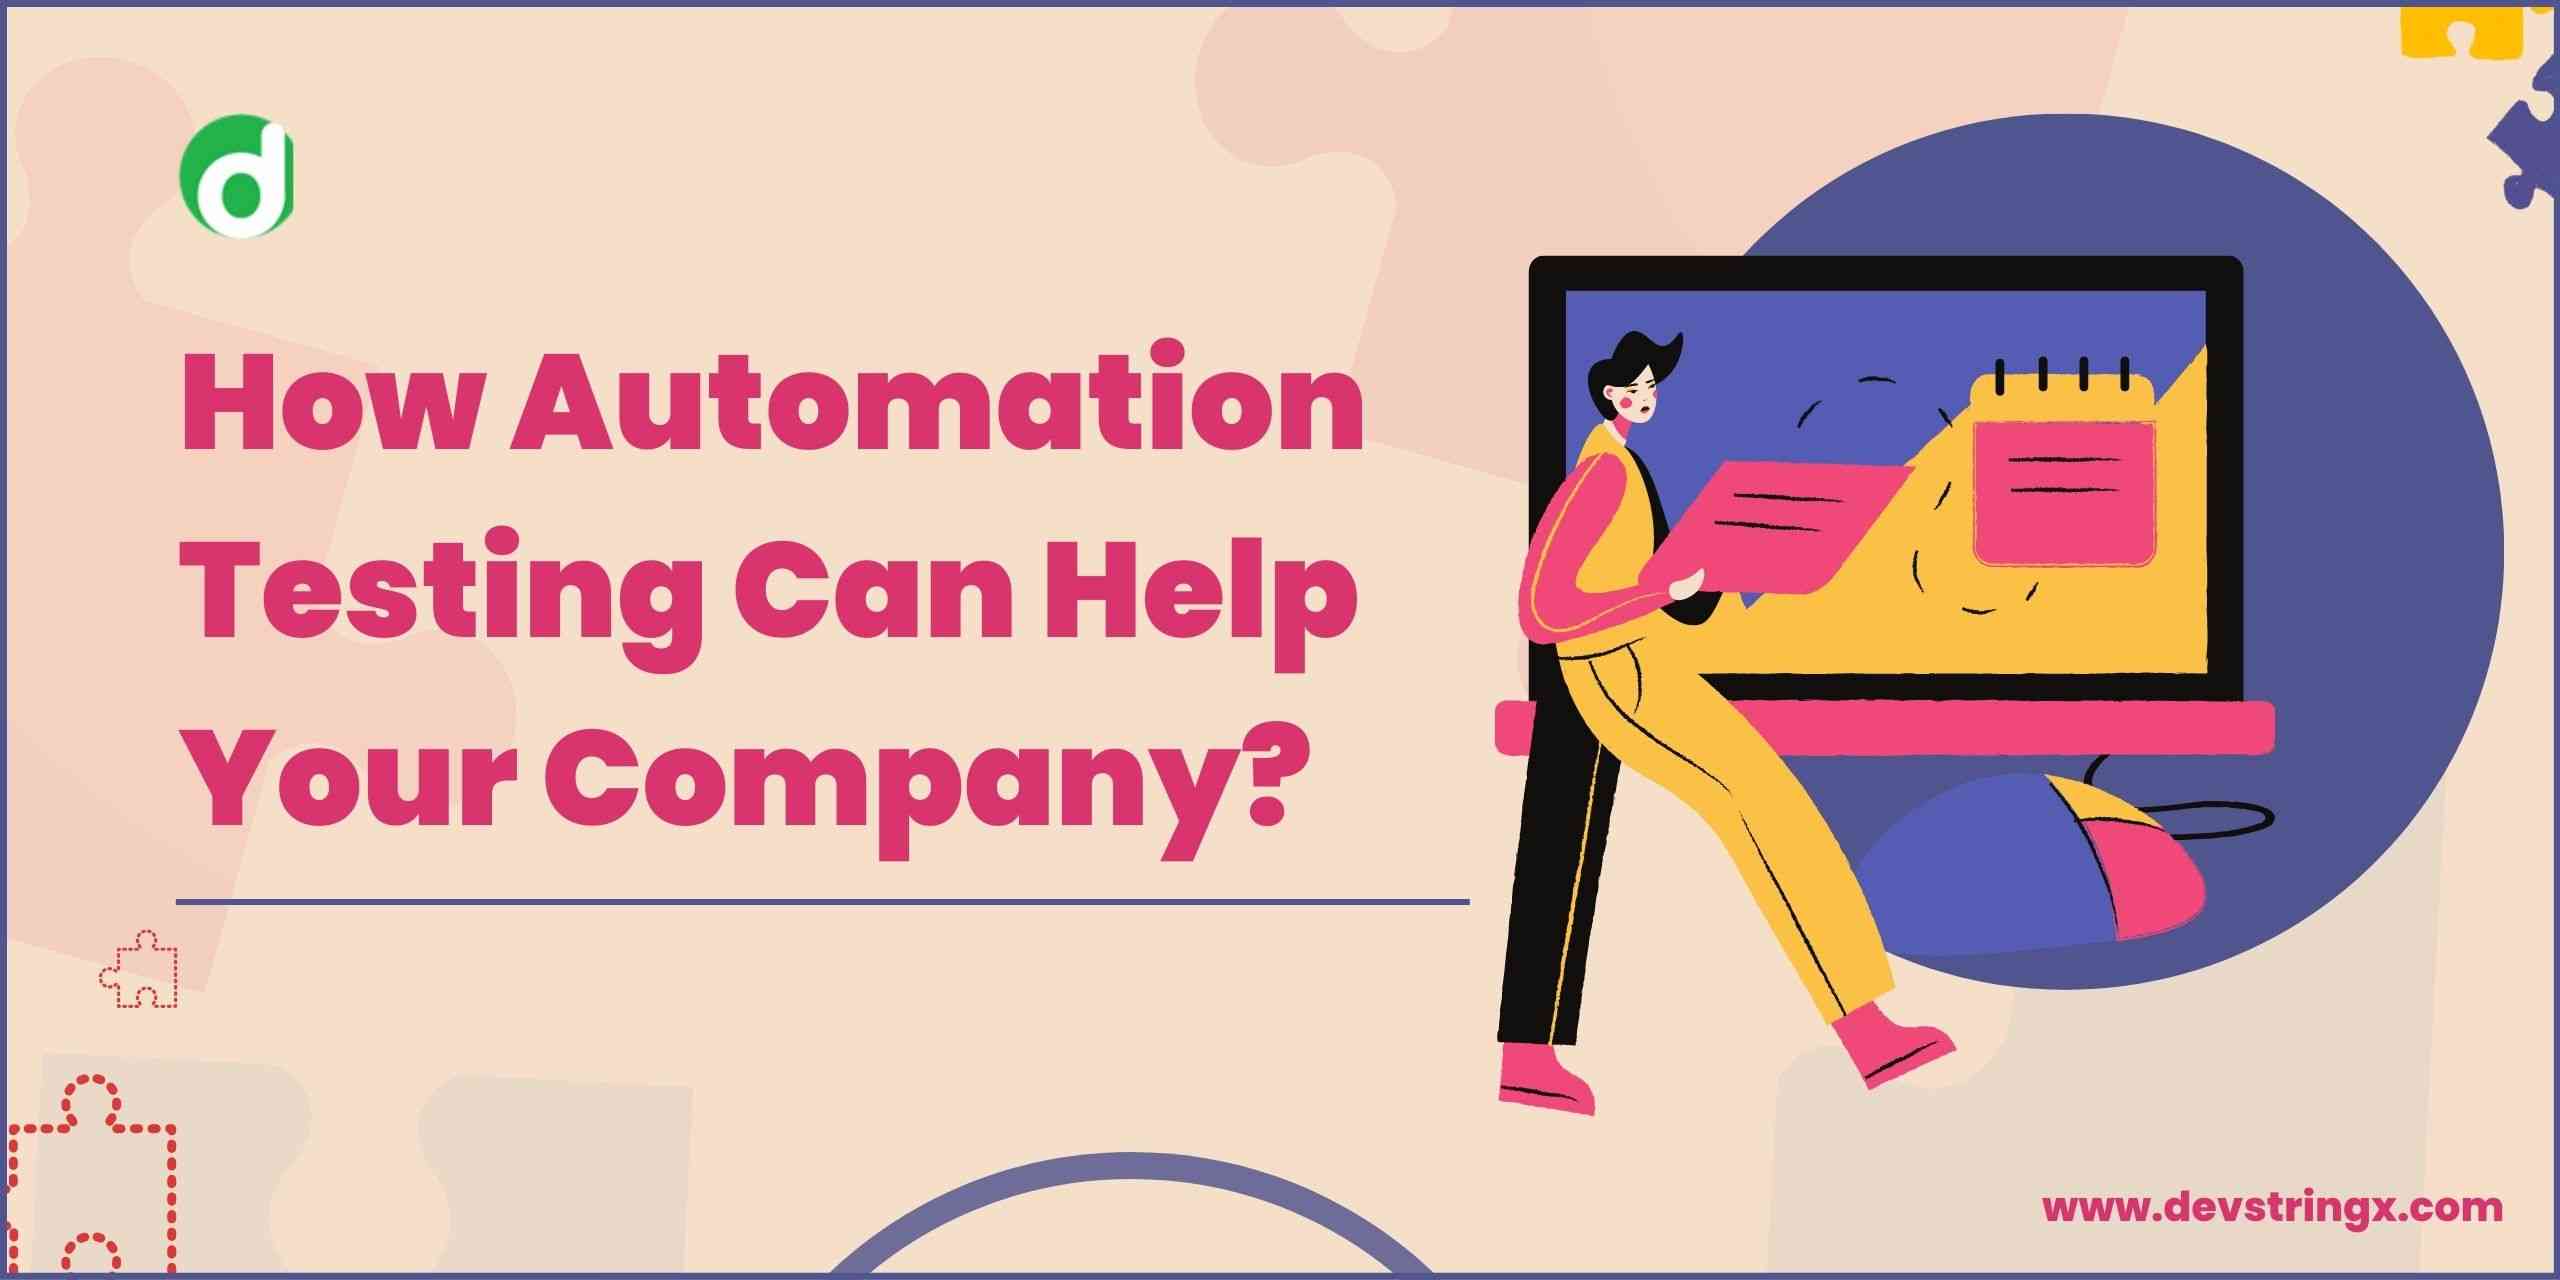 Feature image for automation blog